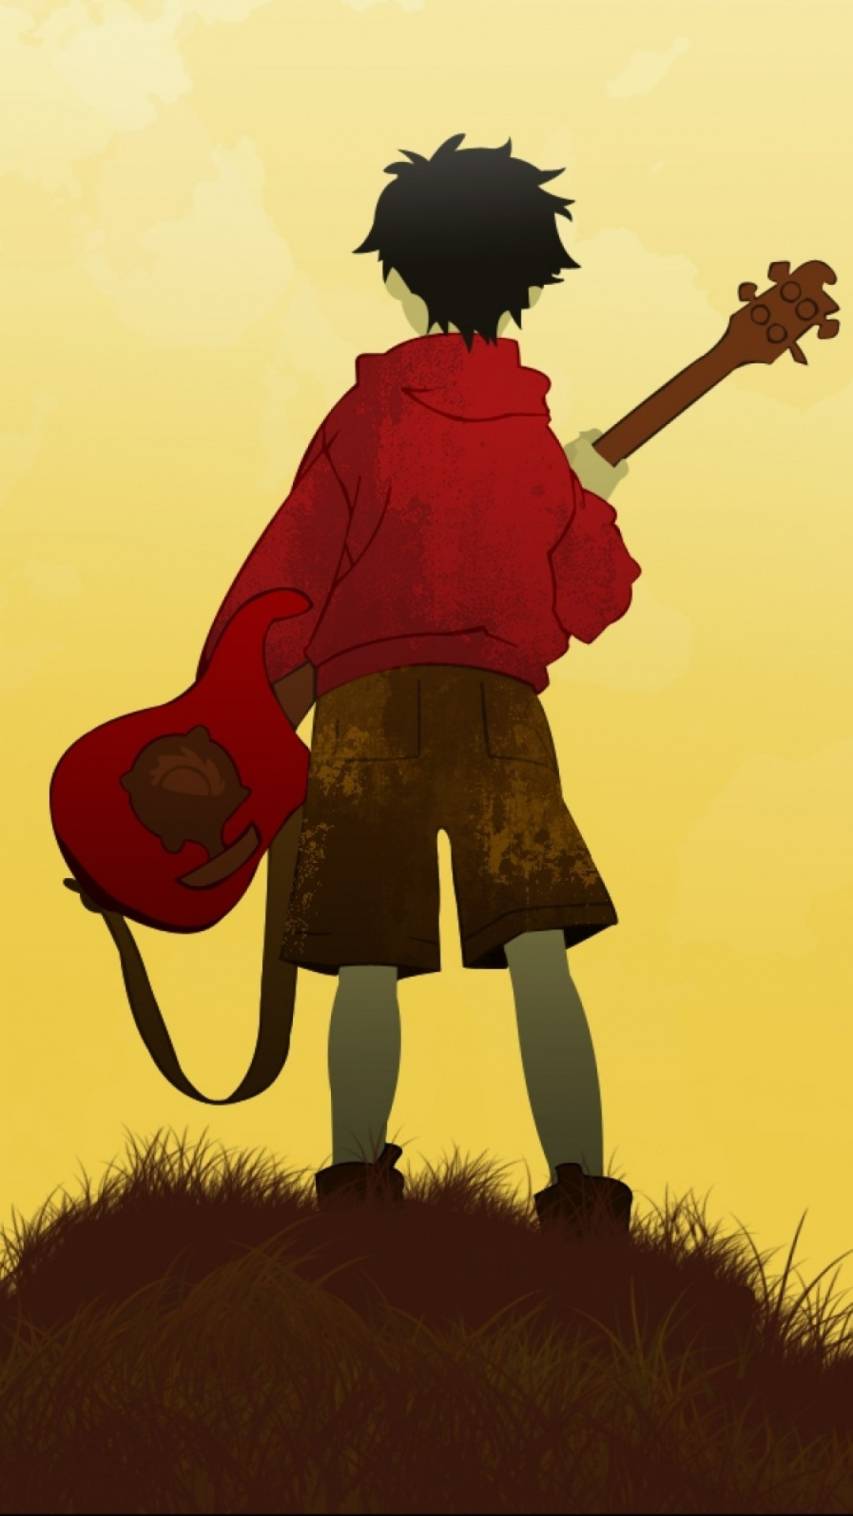 Download Flcl wallpapers for mobile phone free Flcl HD pictures